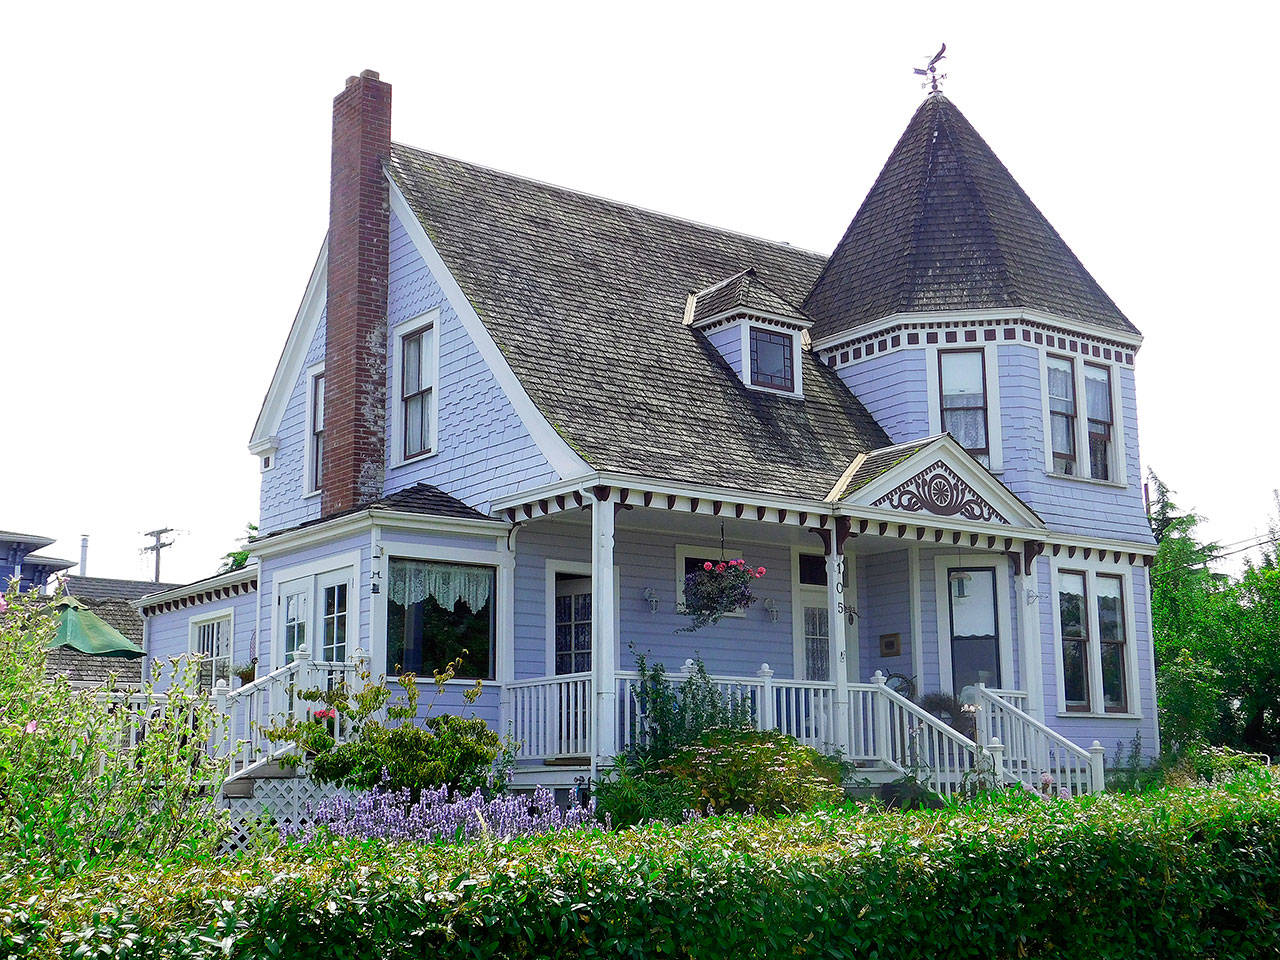 The Todd/Lovejoy House is one of five historic buildings this year that recieved Ebey’s Forever Grants. The money will be used to replace the roof and make repairs to the porch. Photo provided